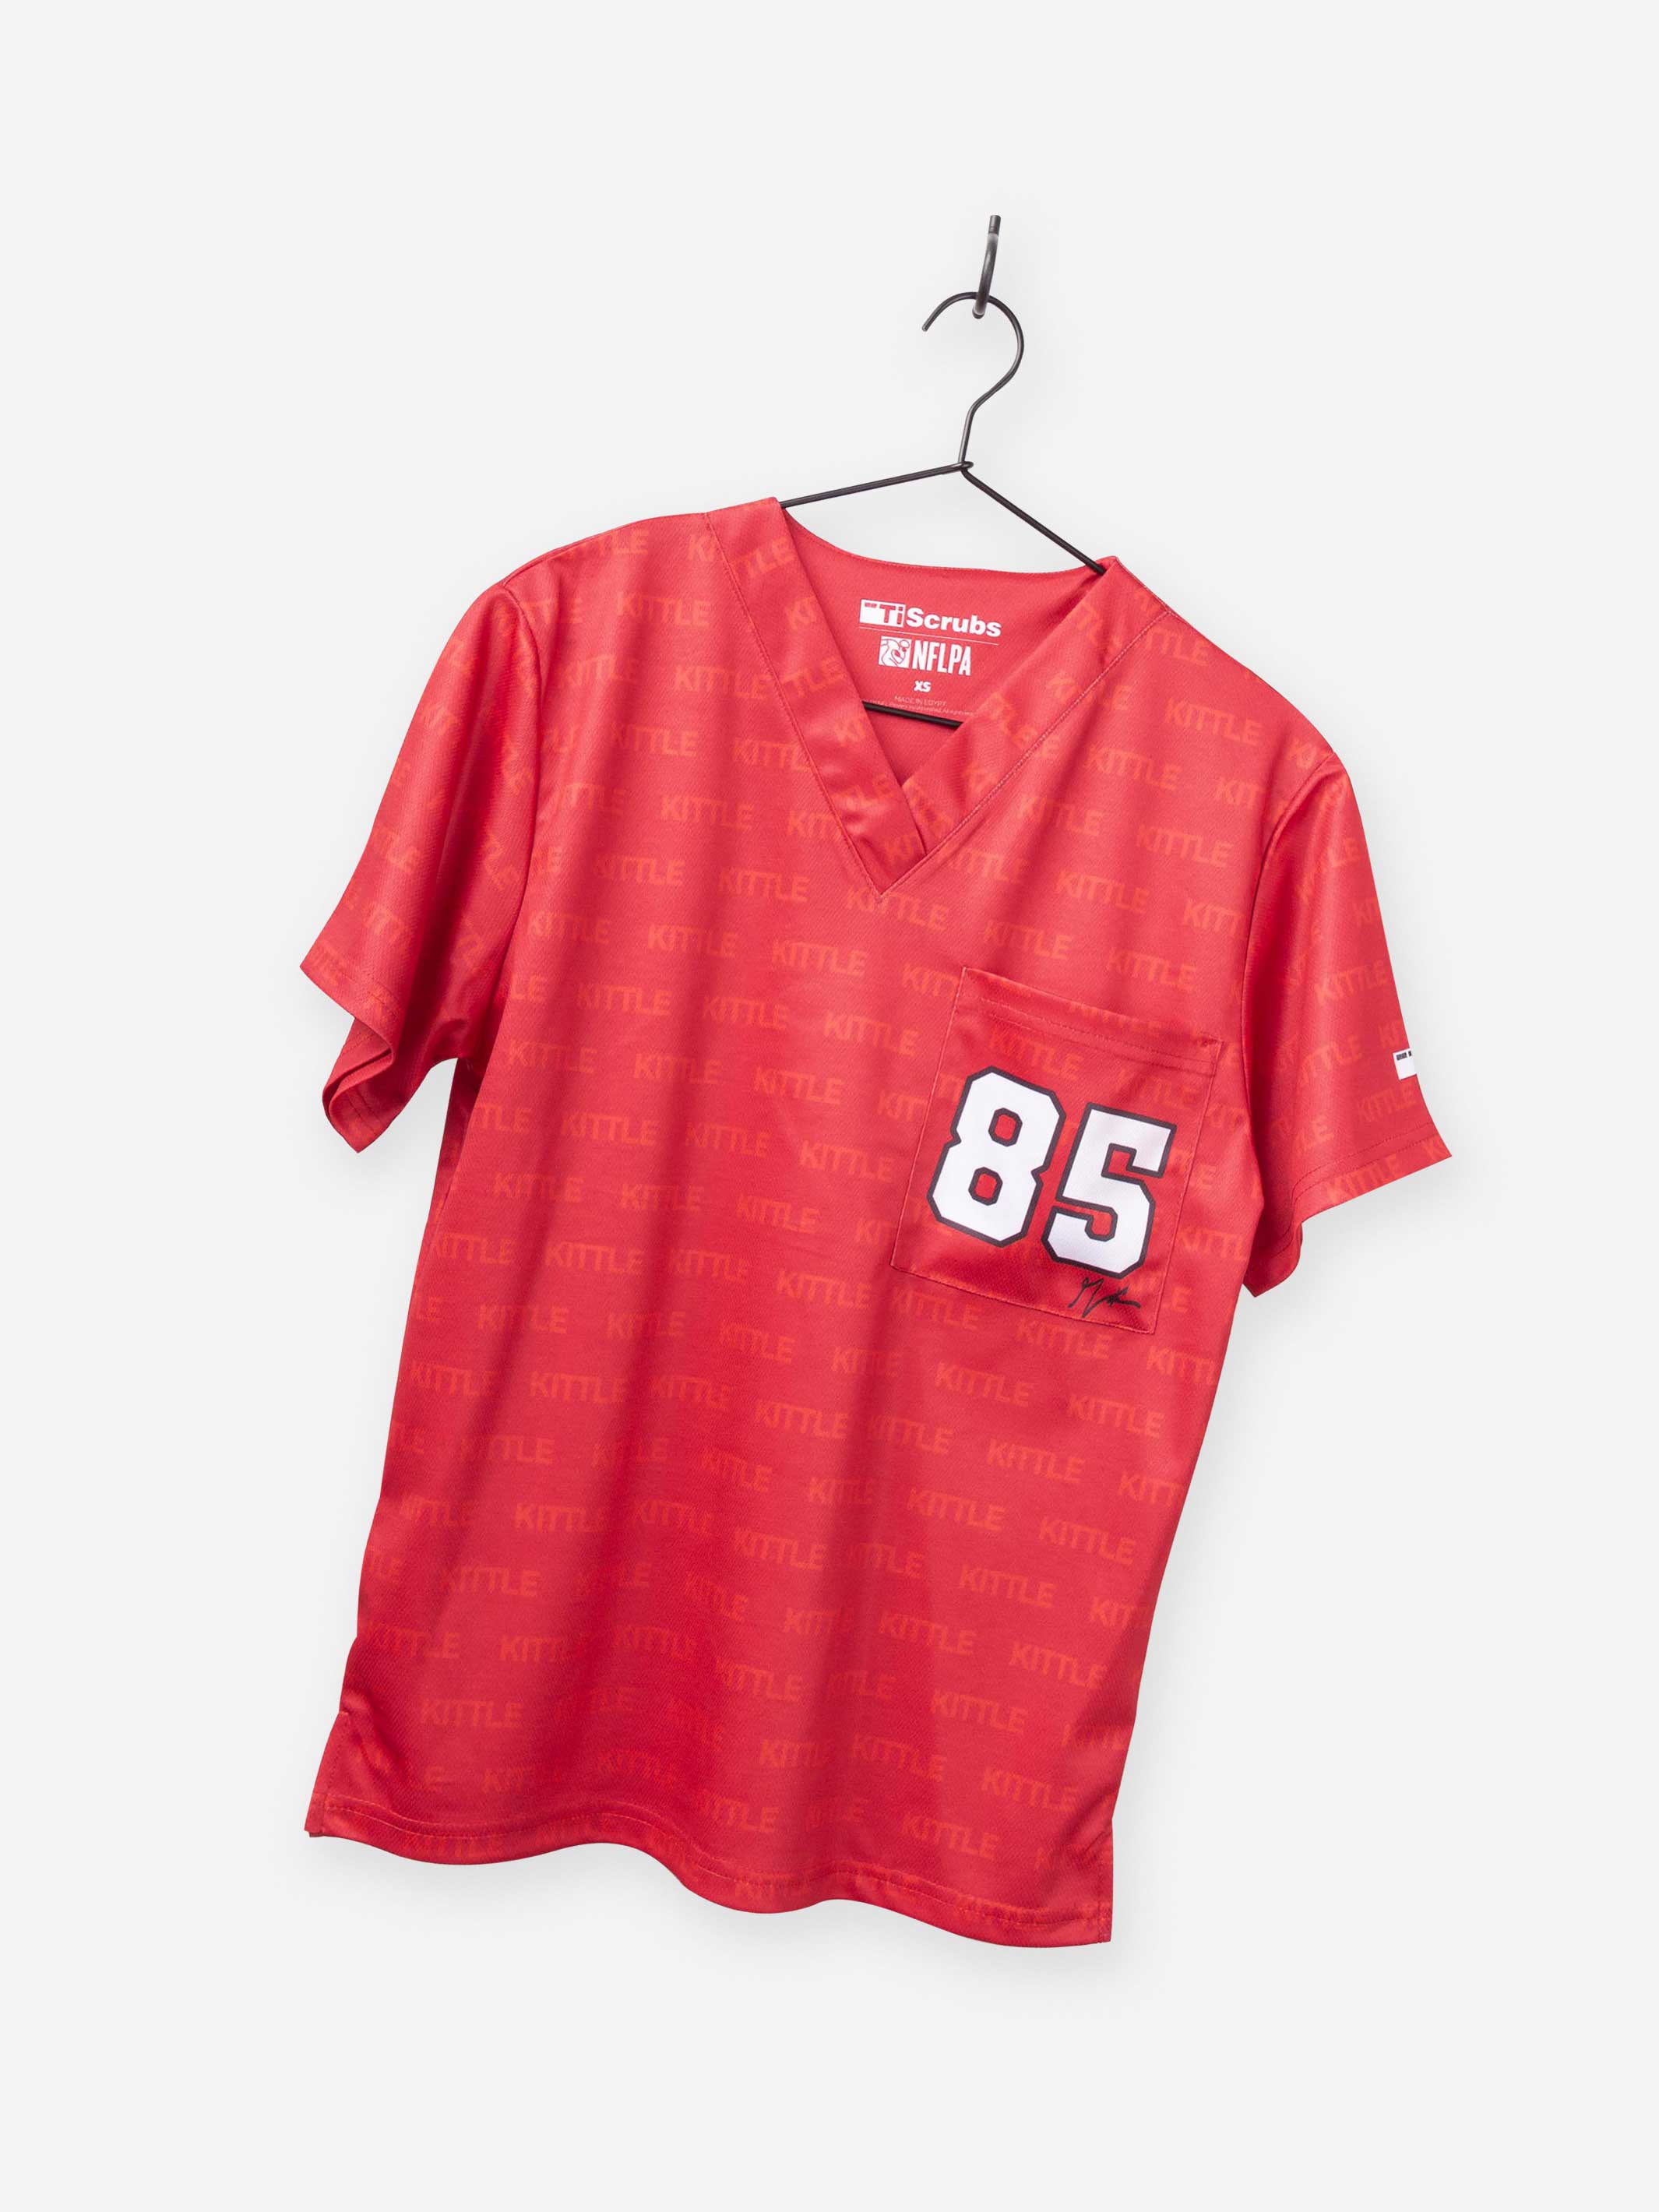 Men's George Kittle Scrub Top Jersey for football fans